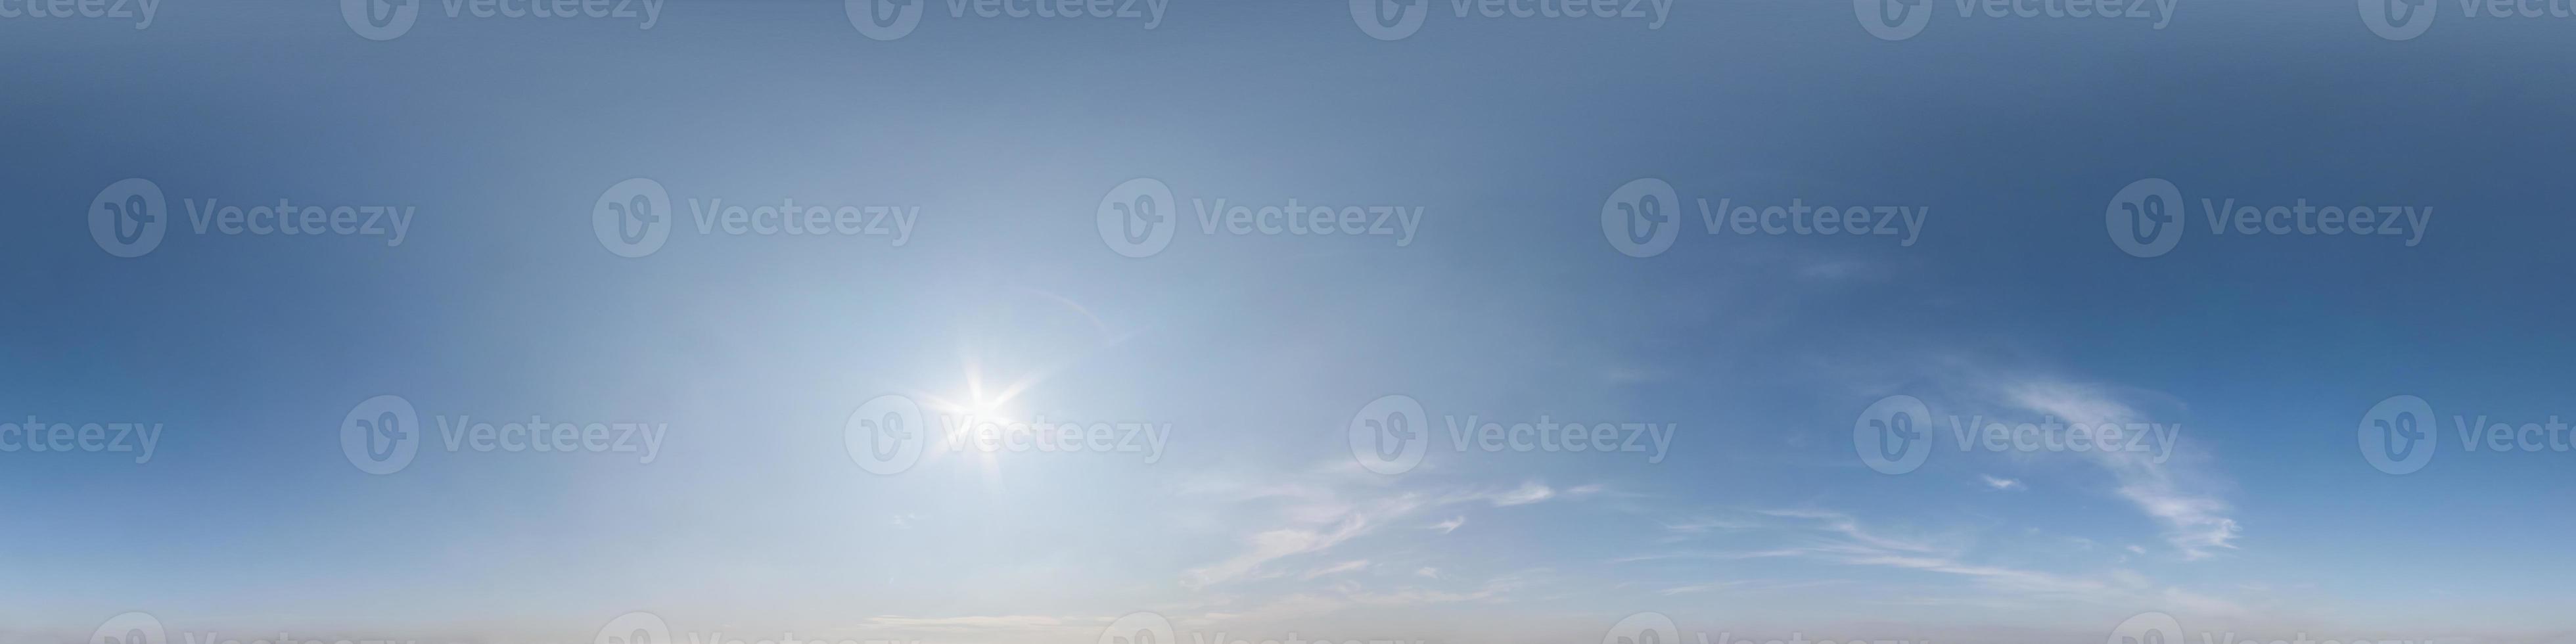 clear blue sky with white beautiful clouds. Seamless hdri panorama 360 degrees angle view  with zenith for use in 3d graphics or game development as sky dome or edit drone shot photo